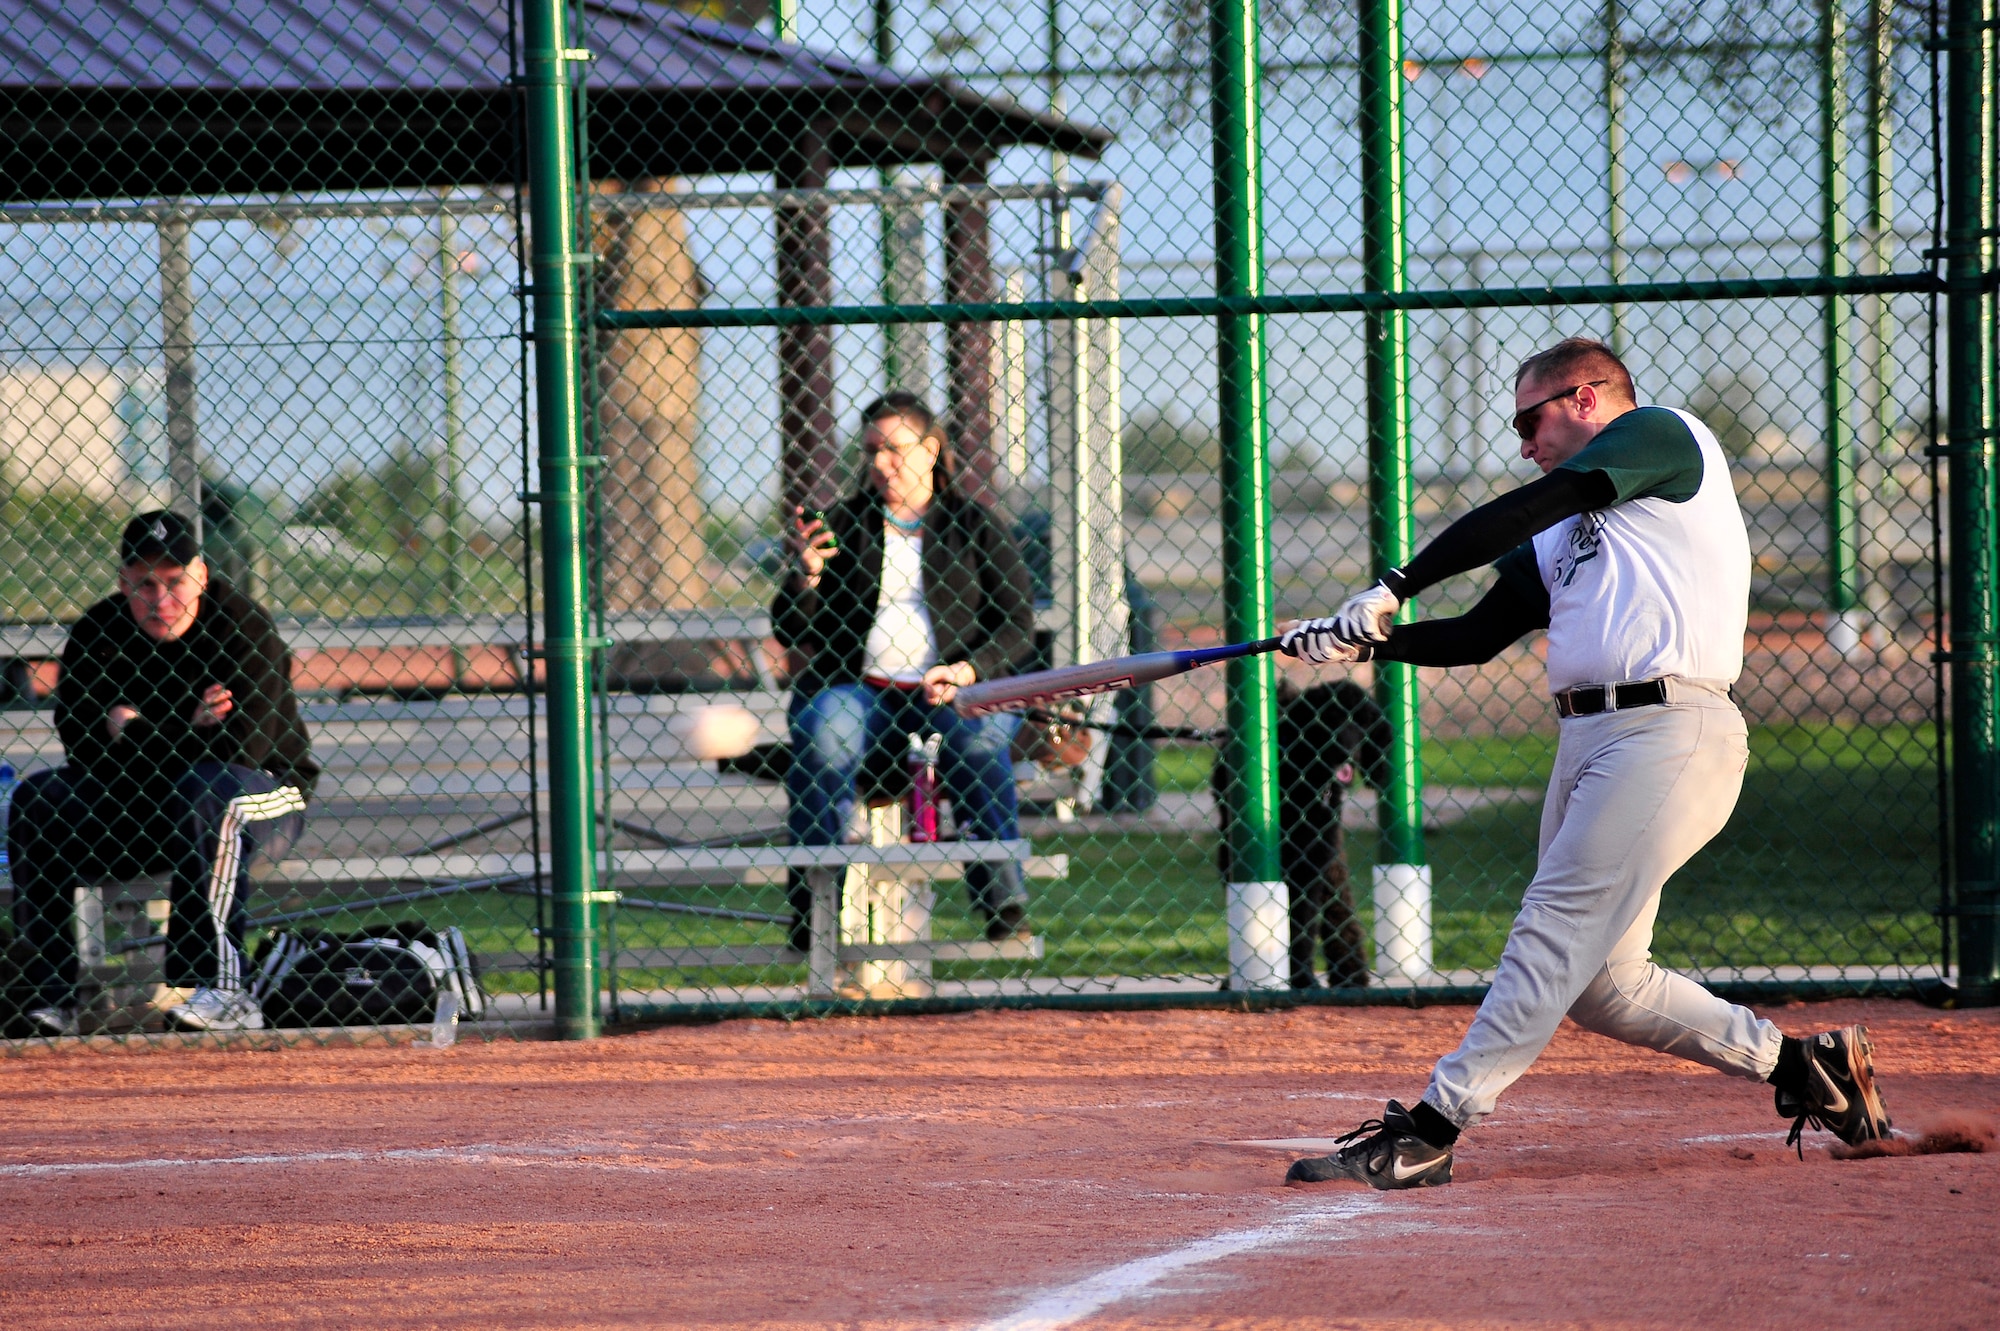 BUCKLEY AIR FORCE BASE, Colo. -- Staff Sgt. Larry Bouchard, Air Force Intelligence, Surveillance, and Reconnaissance Agency Detachment 45 Satellite Operations non-commissioned officer-in-charge,  swings in the batter's box during a base softball game May 16. Sergeant Bouchard not only enjoys the sport, he is also a certified baseball umpire. (U.S. Air Force photo by Staff Sgt. Kathrine McDowell)